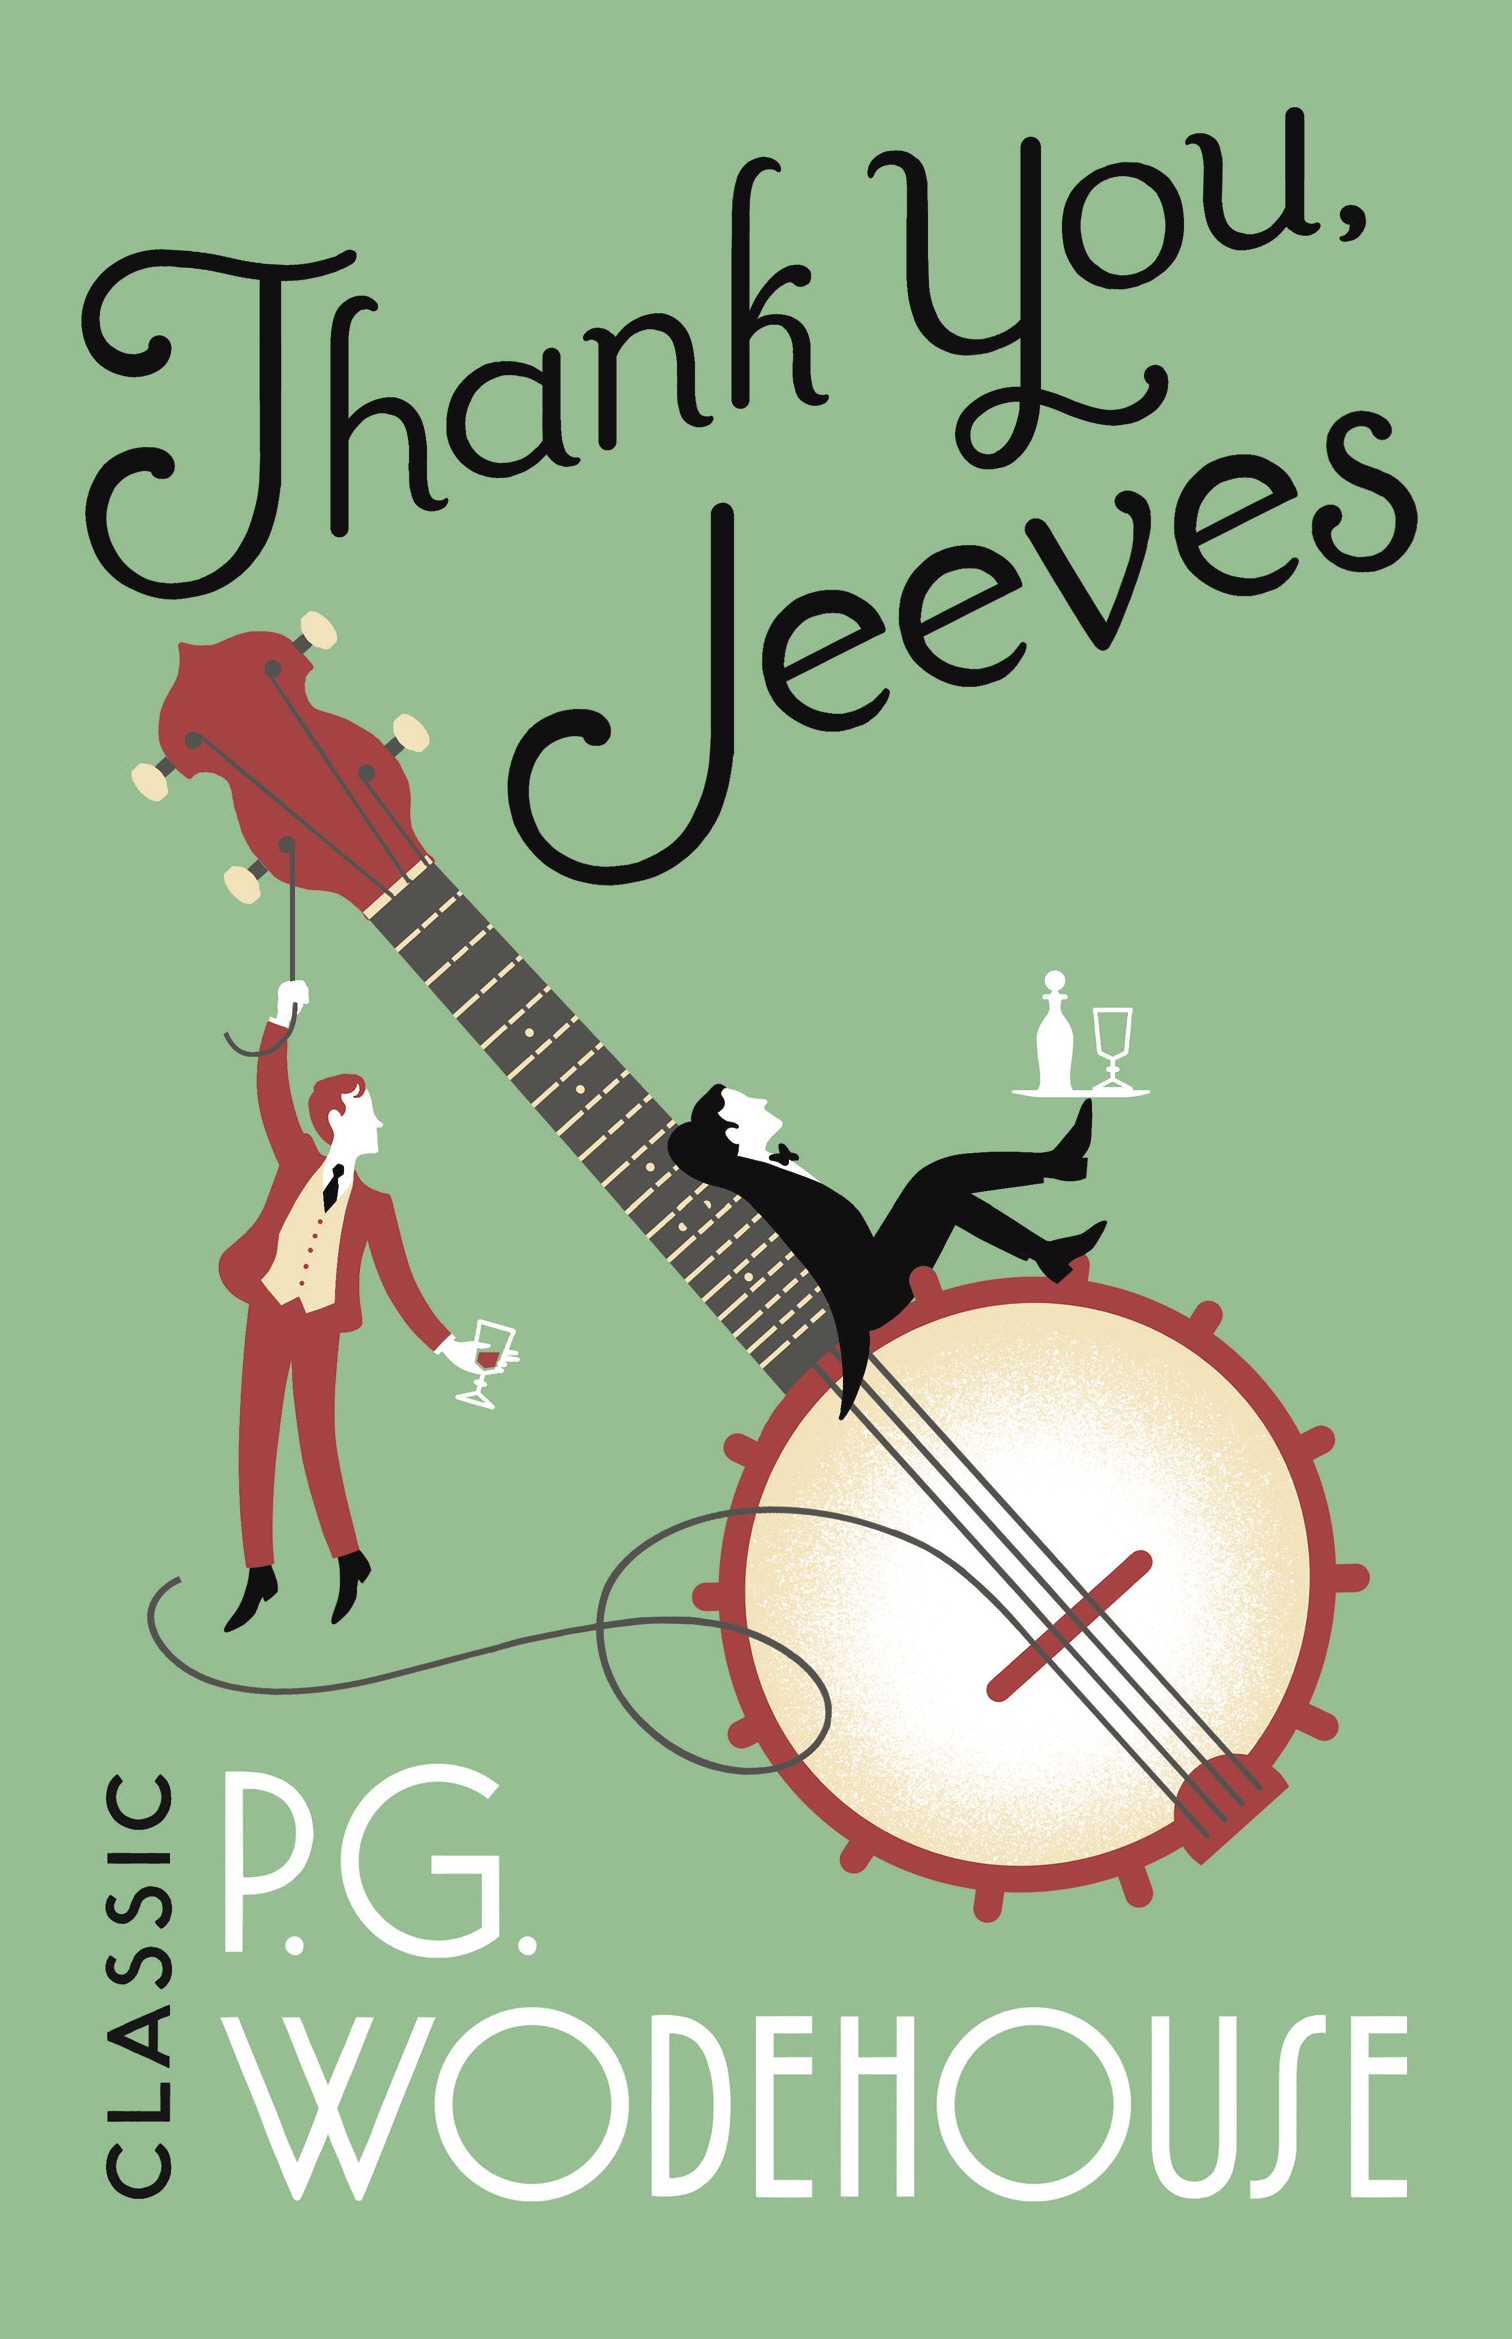 Book “Thank You, Jeeves” by P.G. Wodehouse — June 28, 2018